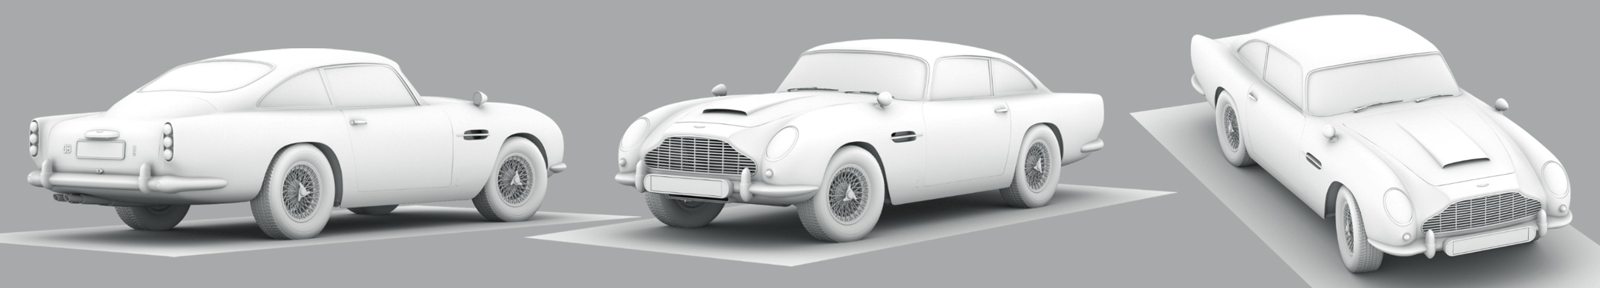 modelling and UV unwrapping of the Aston Martin DB5